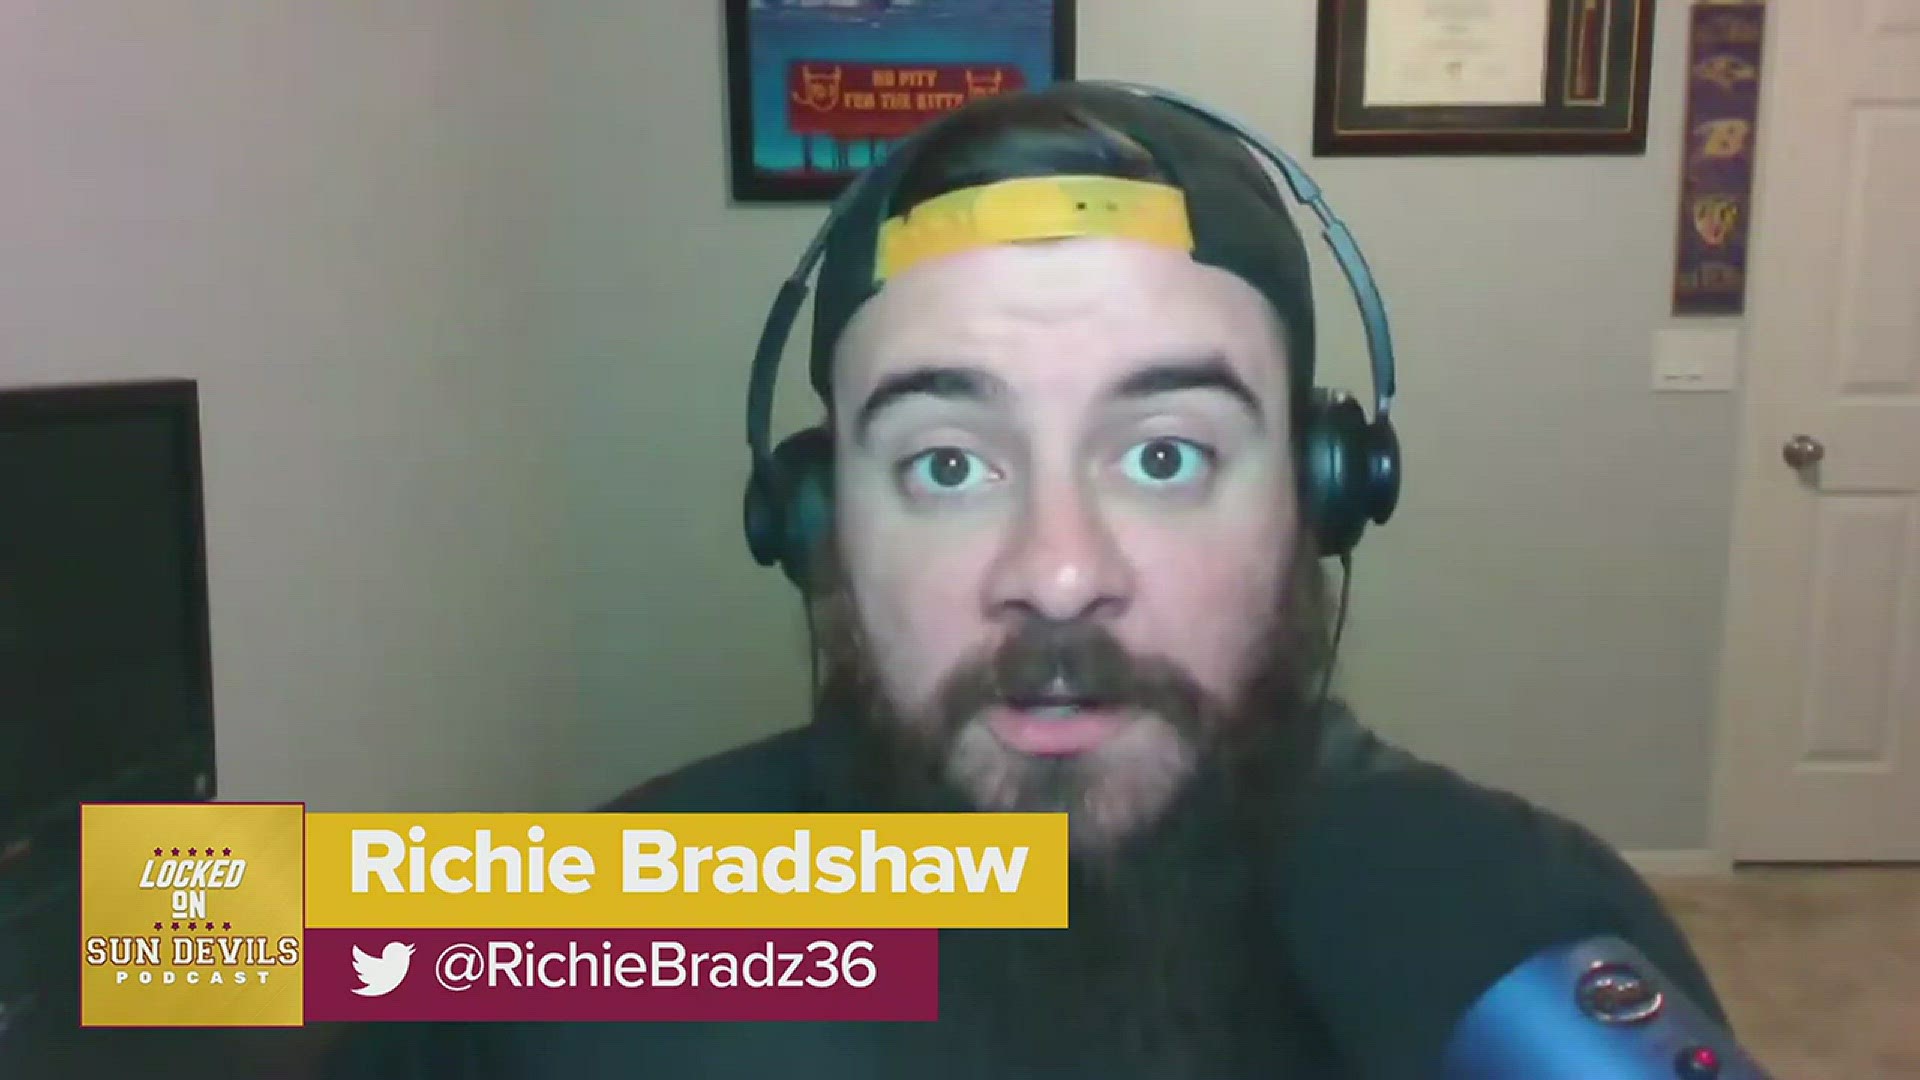 Host Richie Bradshaw discusses all of this and gives tribute to two Sun Devils, Desmond Cambridge Jr. and Warren Washington, being named to All PAC-12 Teams.